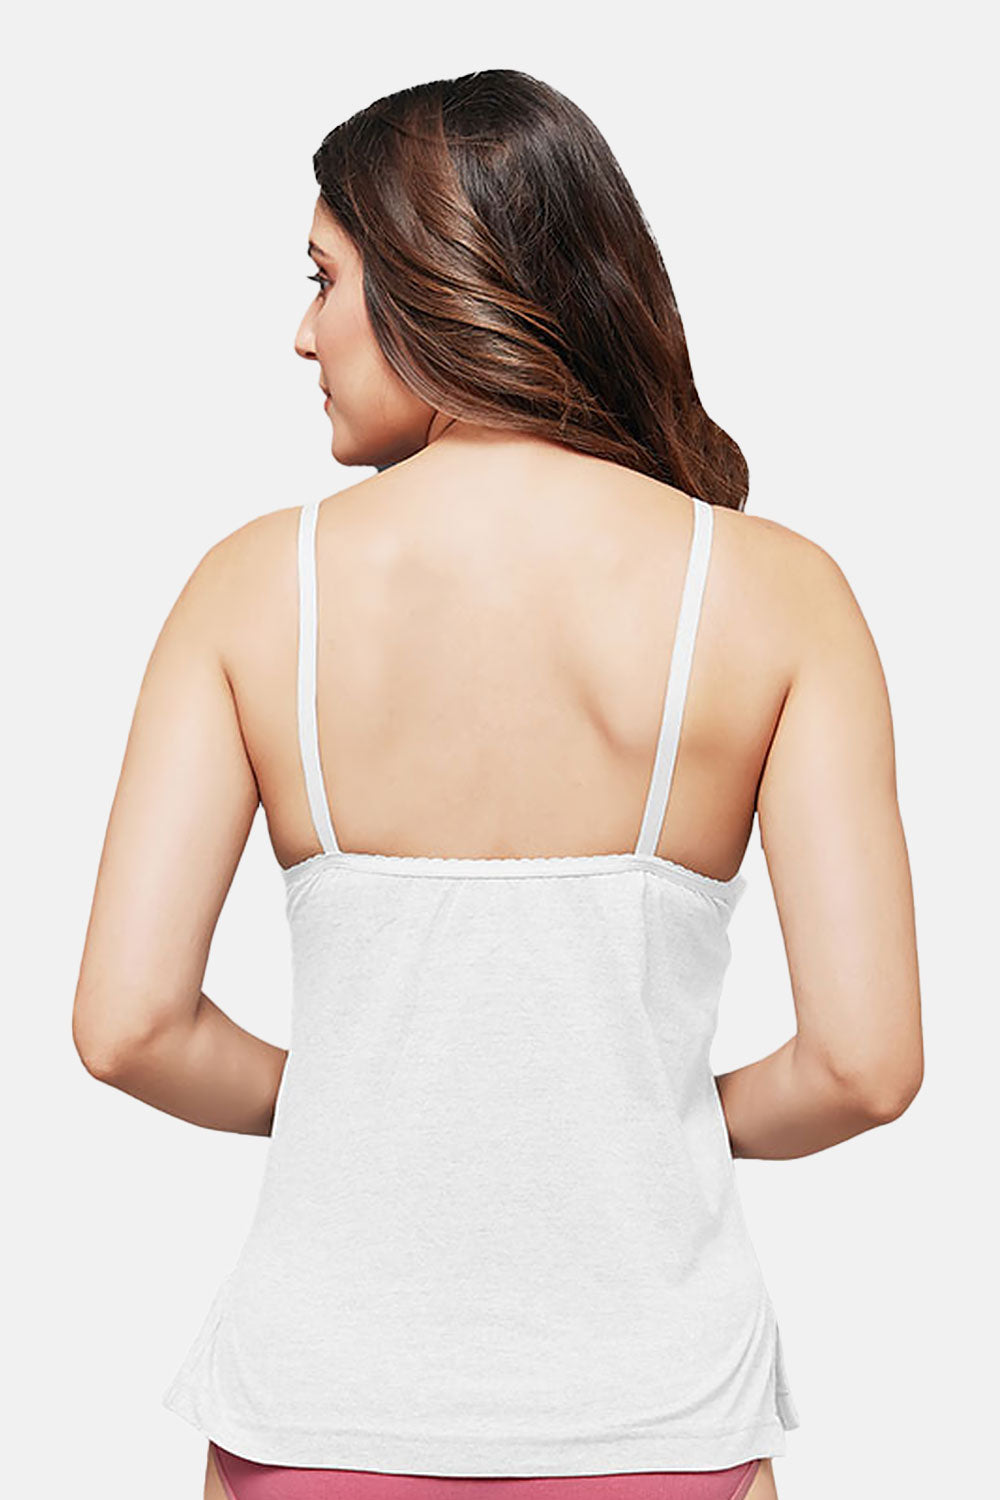 Smooth and fitting camisoles and slips for women